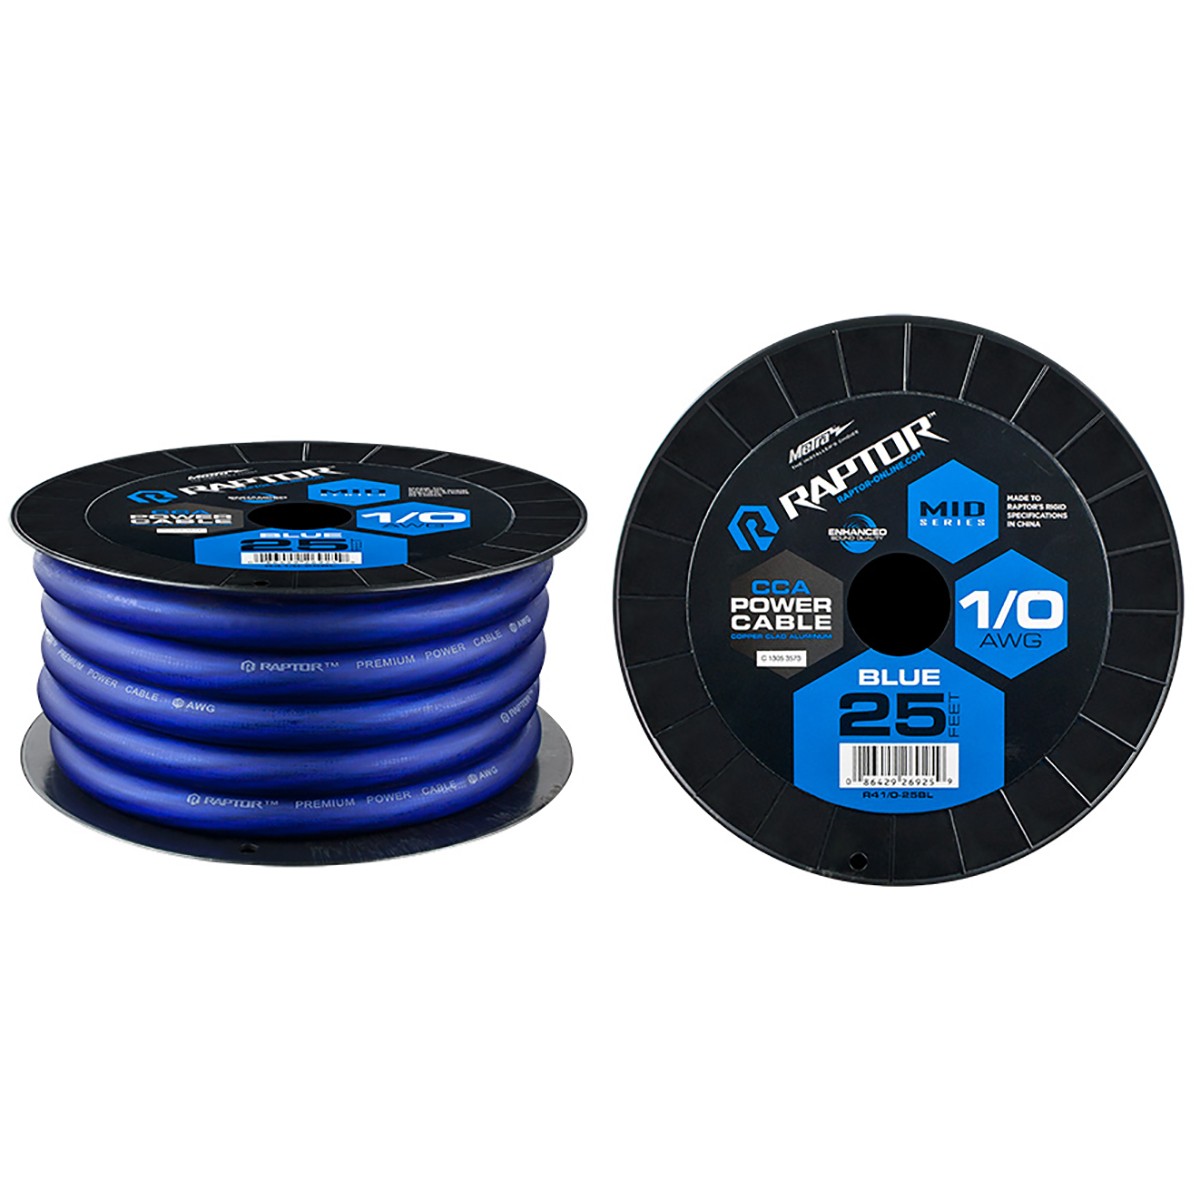 1/0 AWG/25' POWER CABLE BLUE CCA